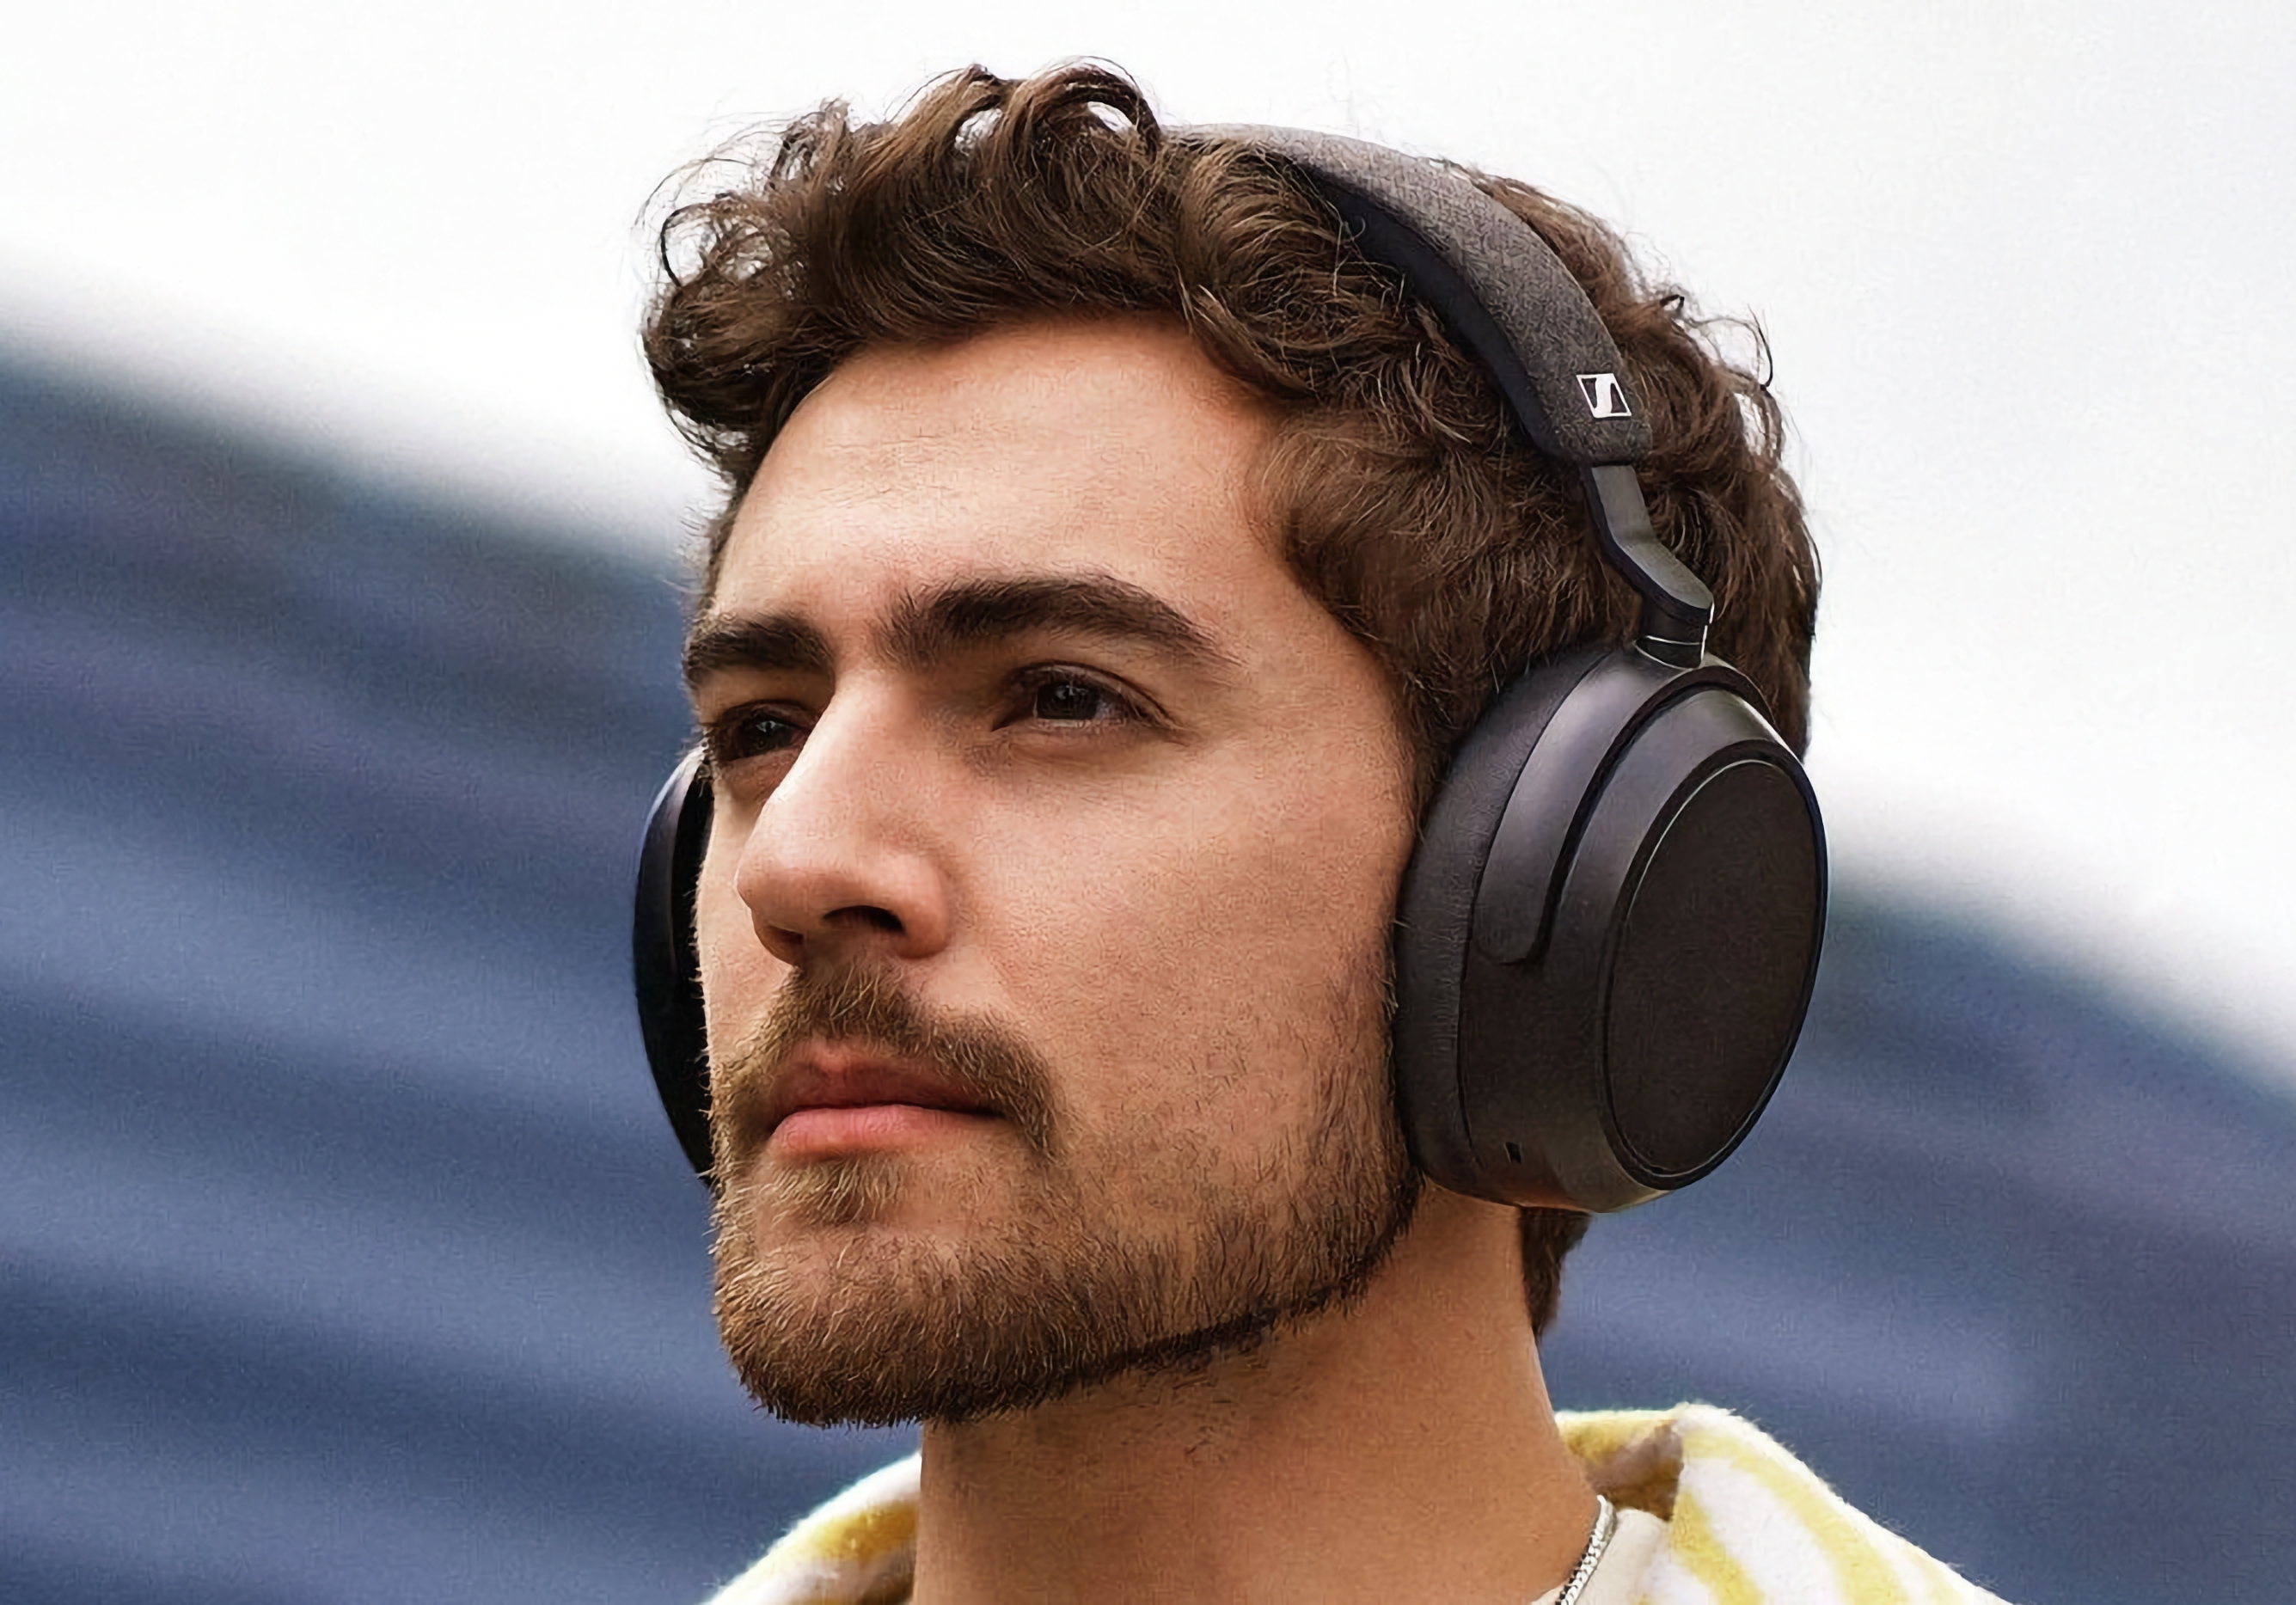 Sennheiser Consumer Audio Momentum 4 Wireless Headphones - Bluetooth  Headset for Crystal-Clear Calls with Adaptive Noise Cancellation, 60h  Battery